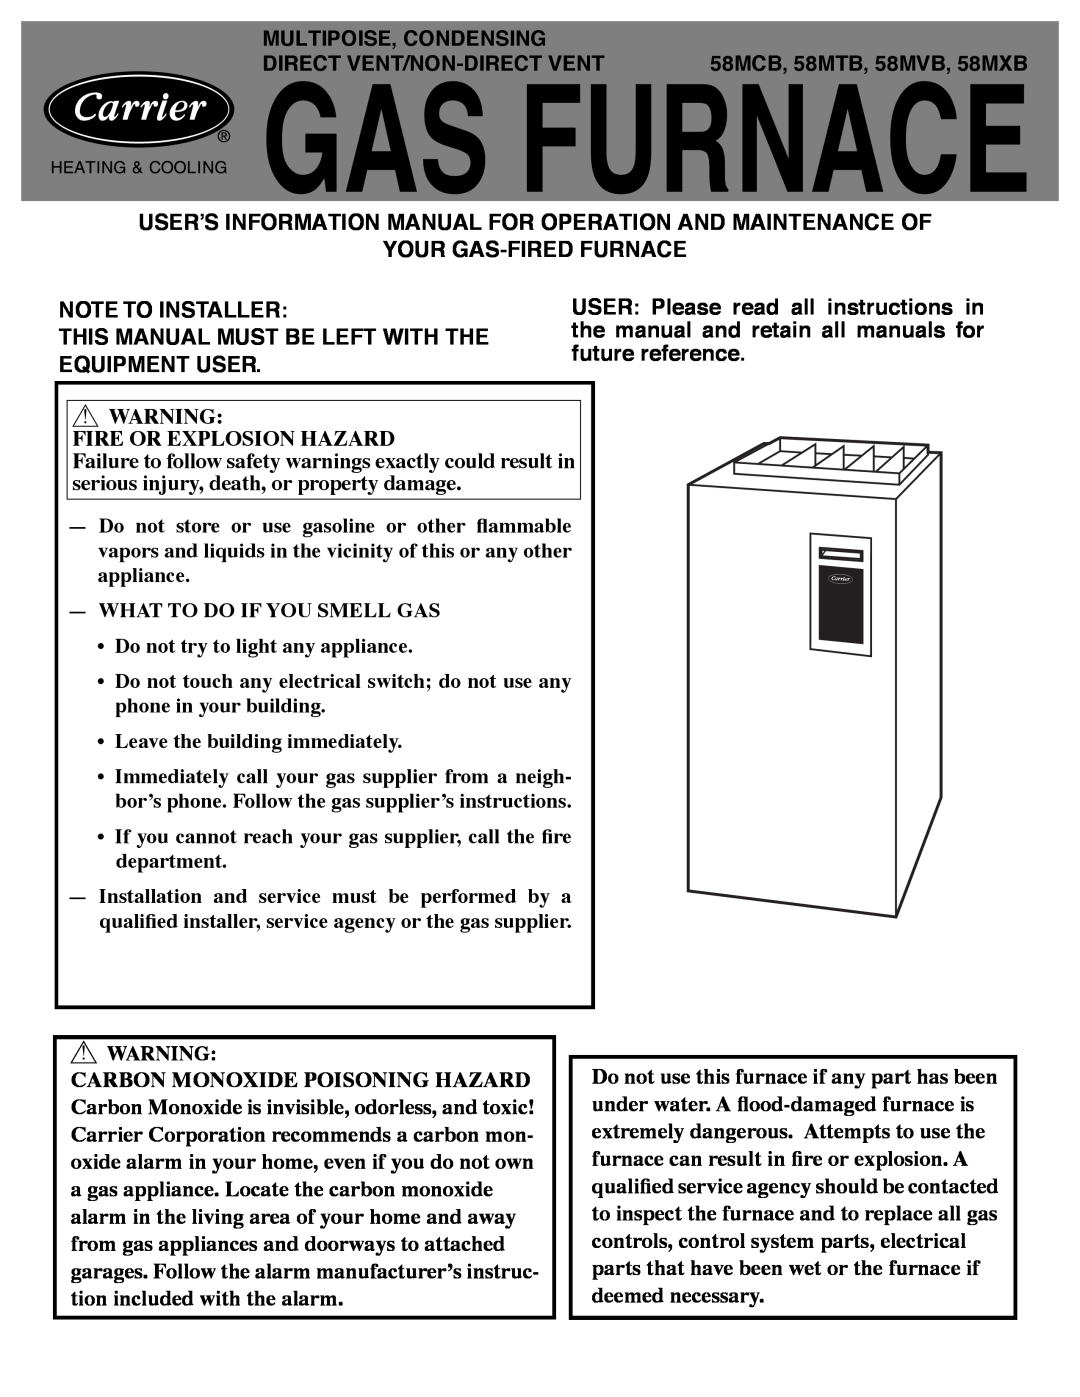 Carrier 58MVB, 58MTB, 58MCB manual Gas Furnace, Your Gas-Firedfurnace, Note To Installer 